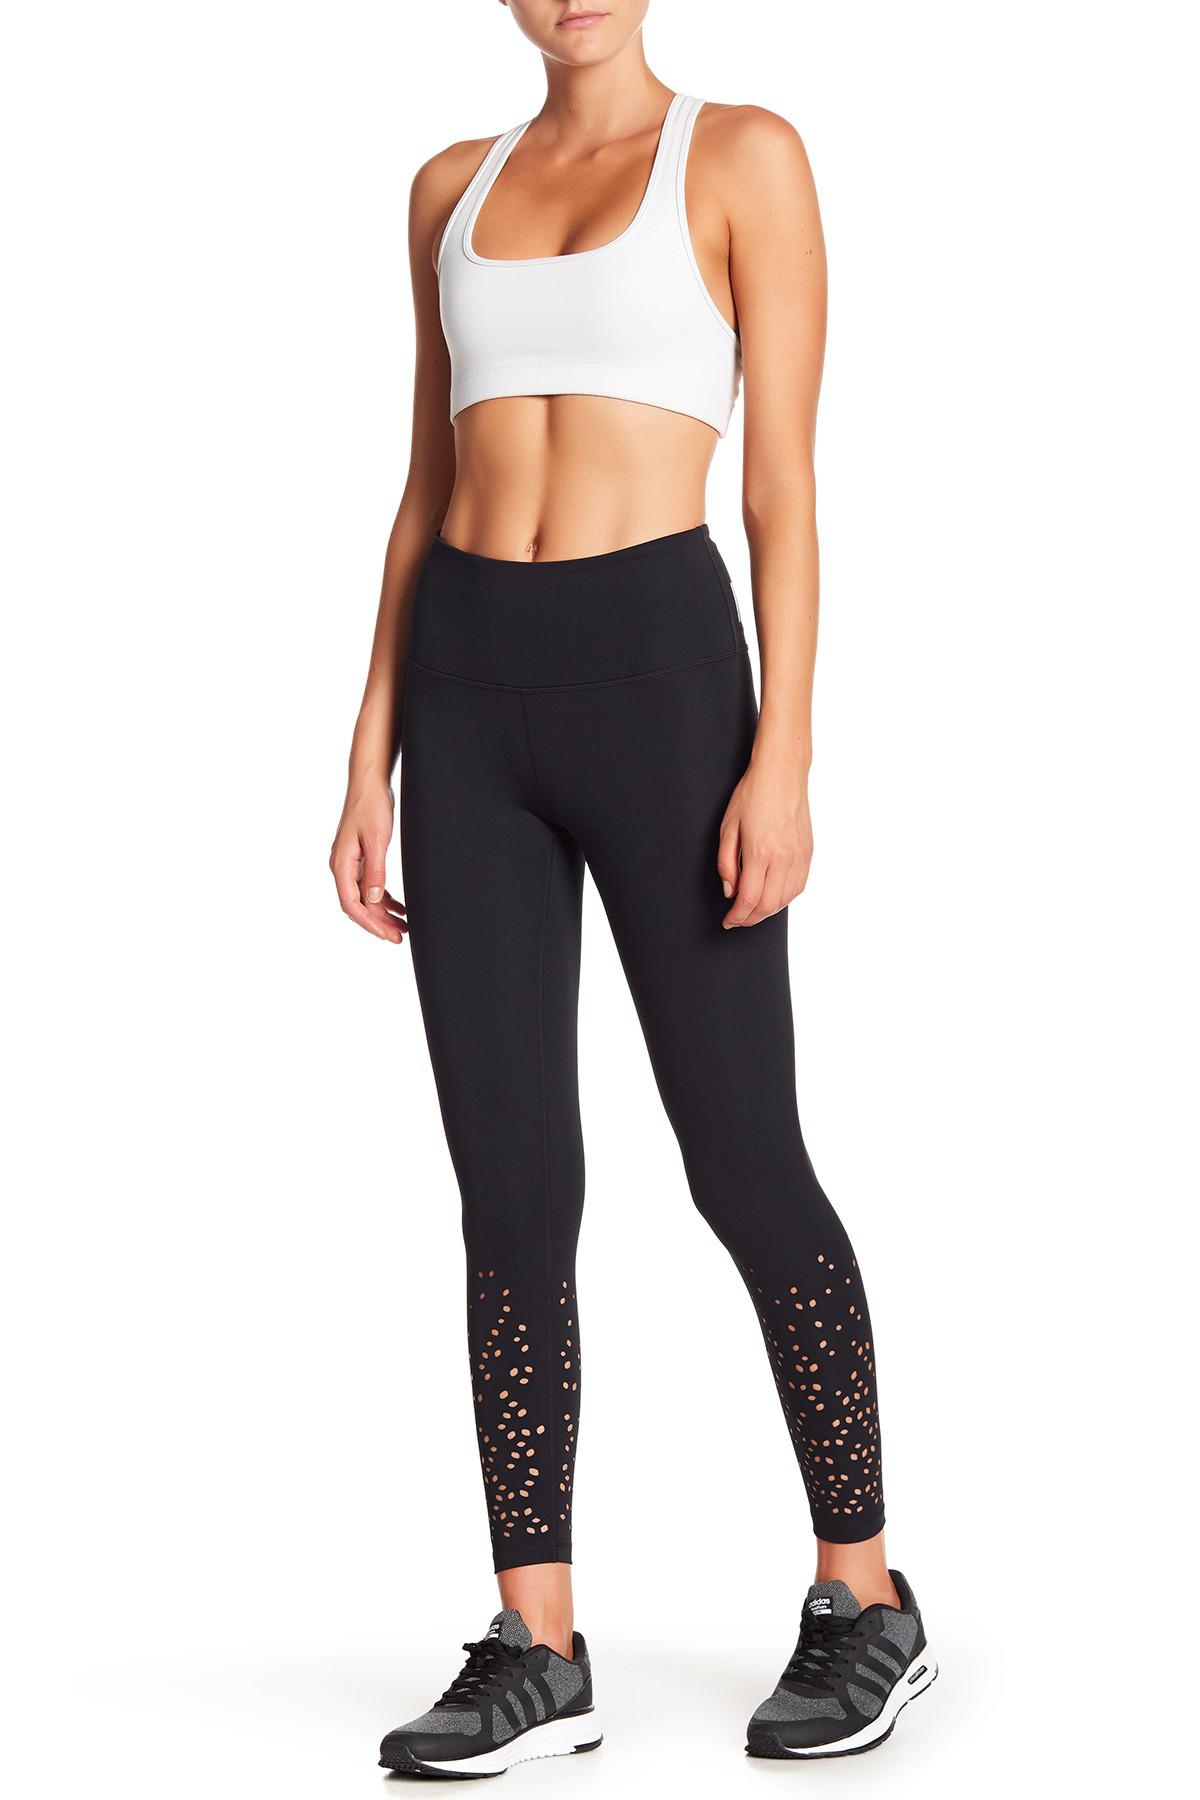 Zella Synthetic High Waisted Geometric Cutout Leggings in Black - Lyst